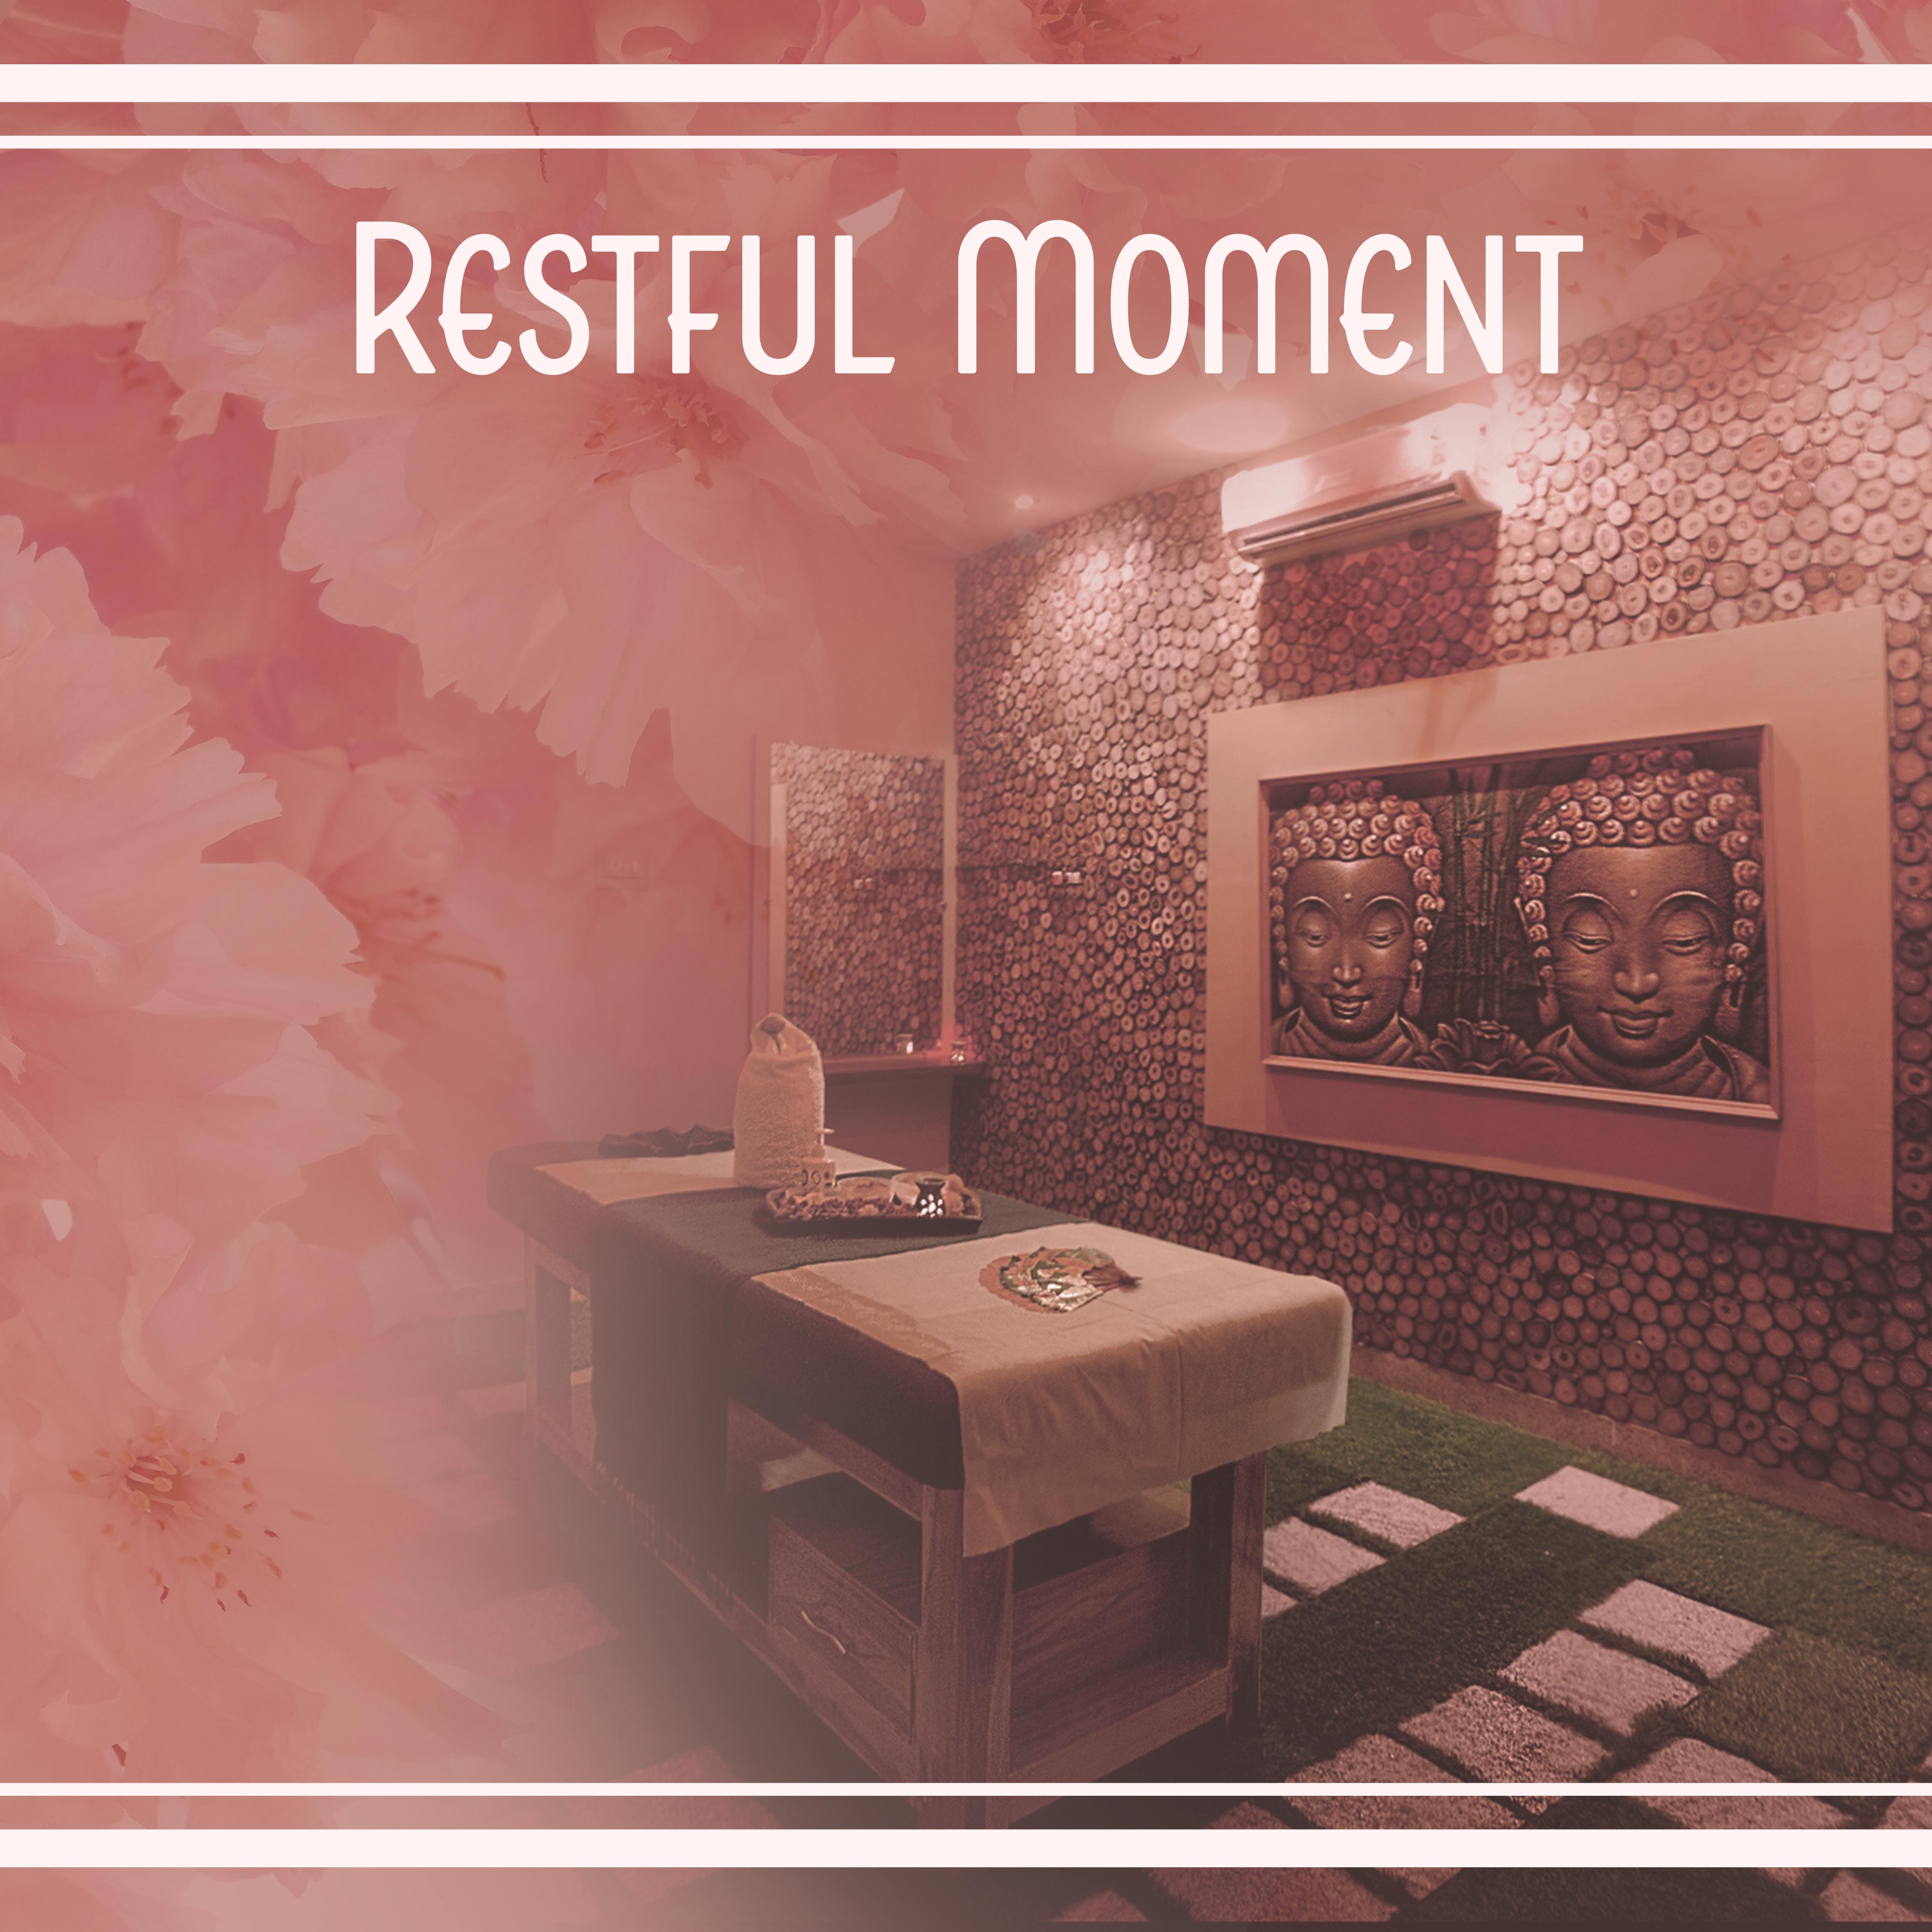 Restful Moment – Spa Music, Calming Water, Oriental Sounds, Sensual Massage, Healing Therapy for Body, Deep Sleep